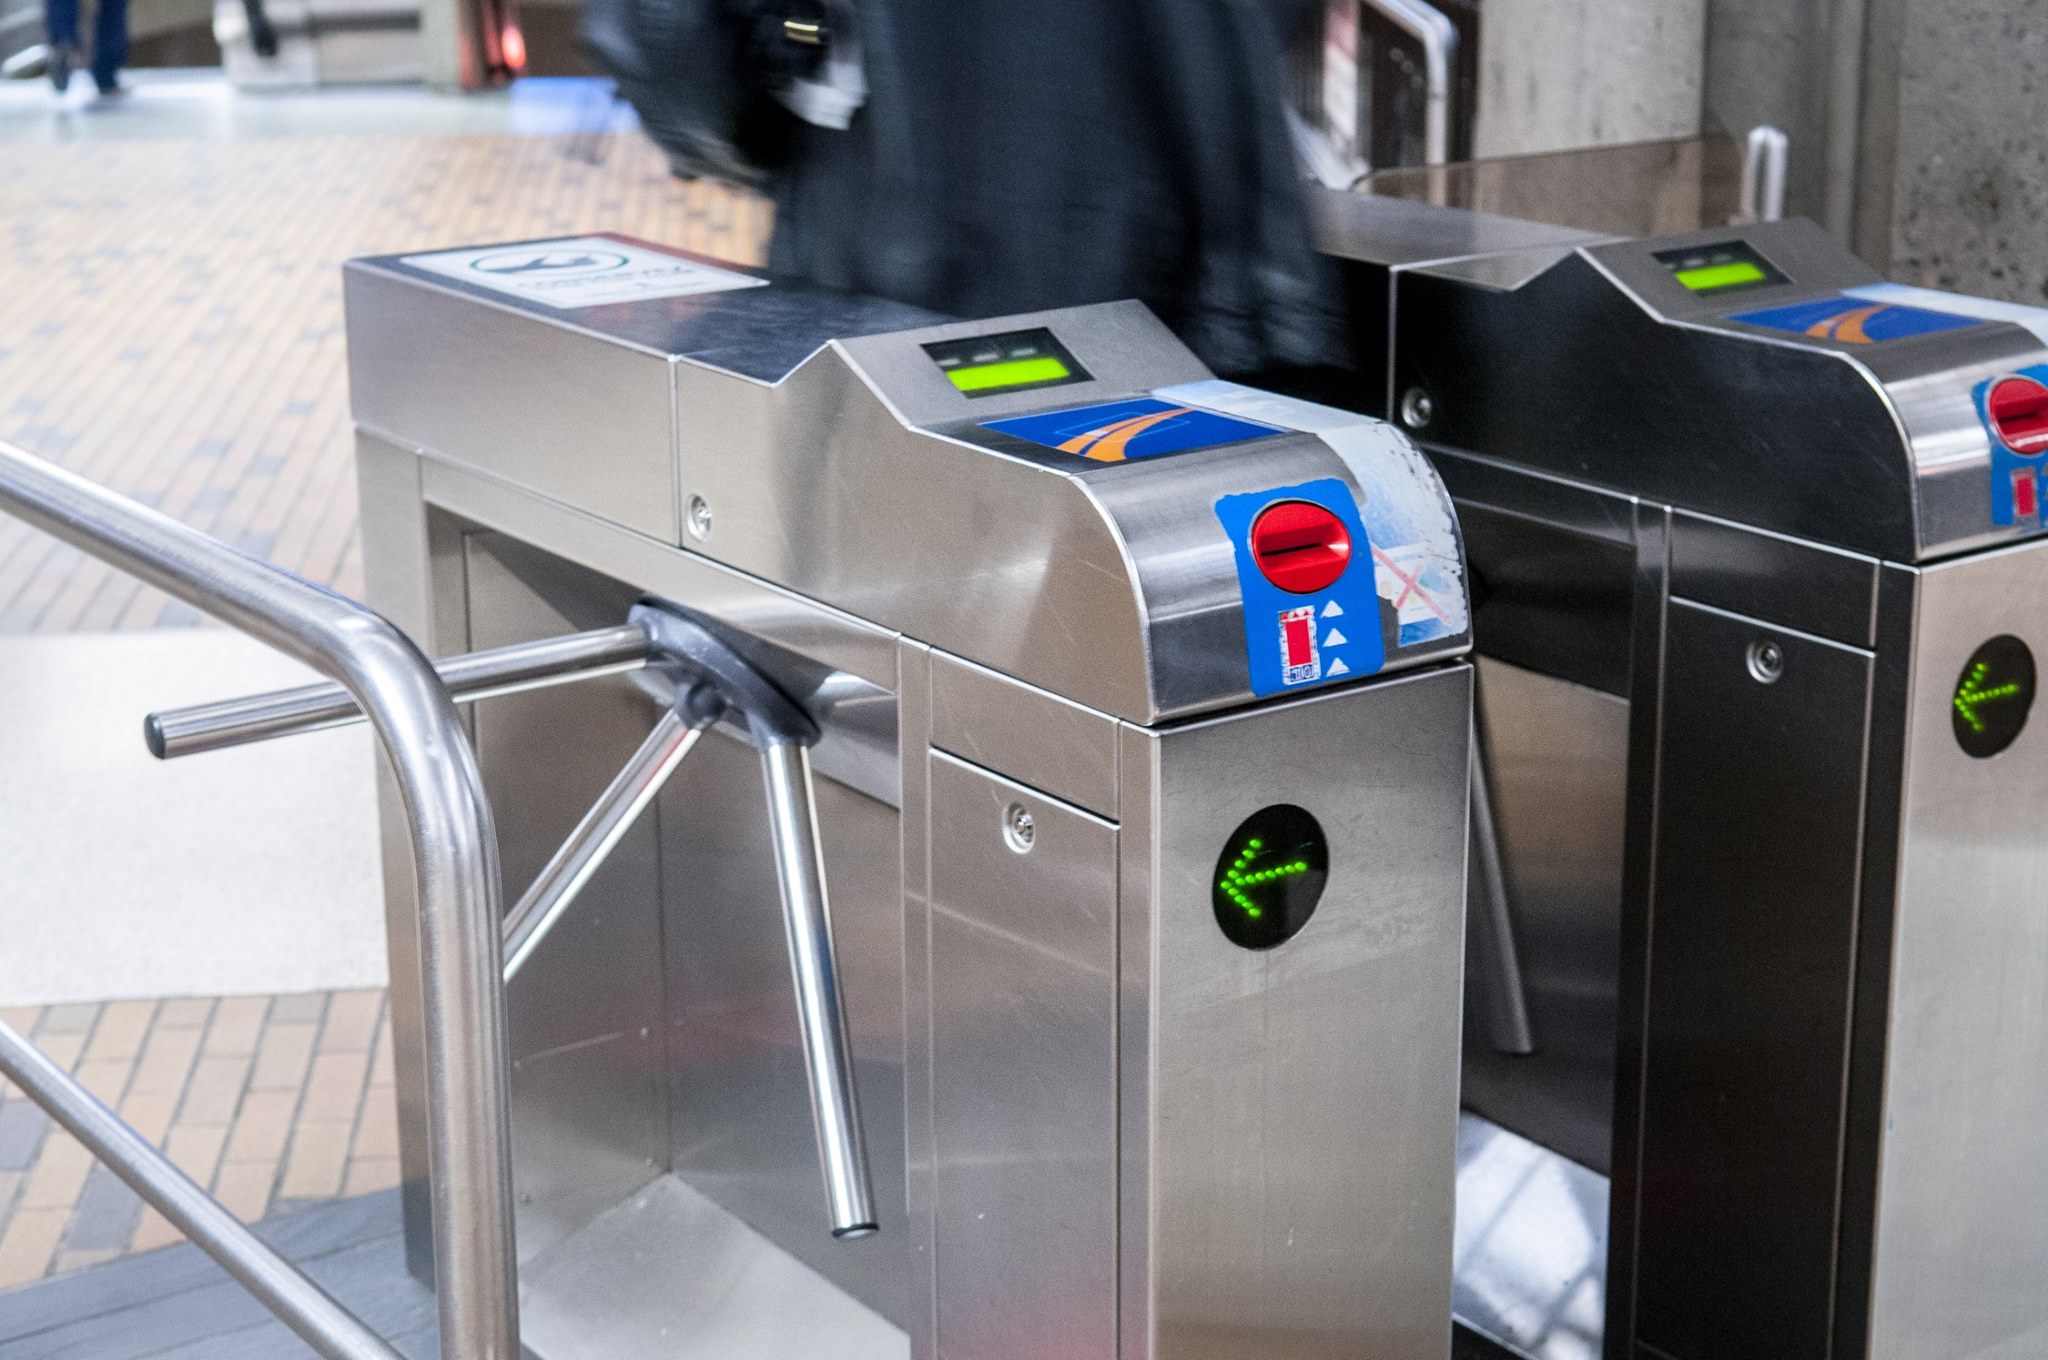 Montréal turnstiles, with a card reader on the top, and an ATM-like card insertion slot on the front side.